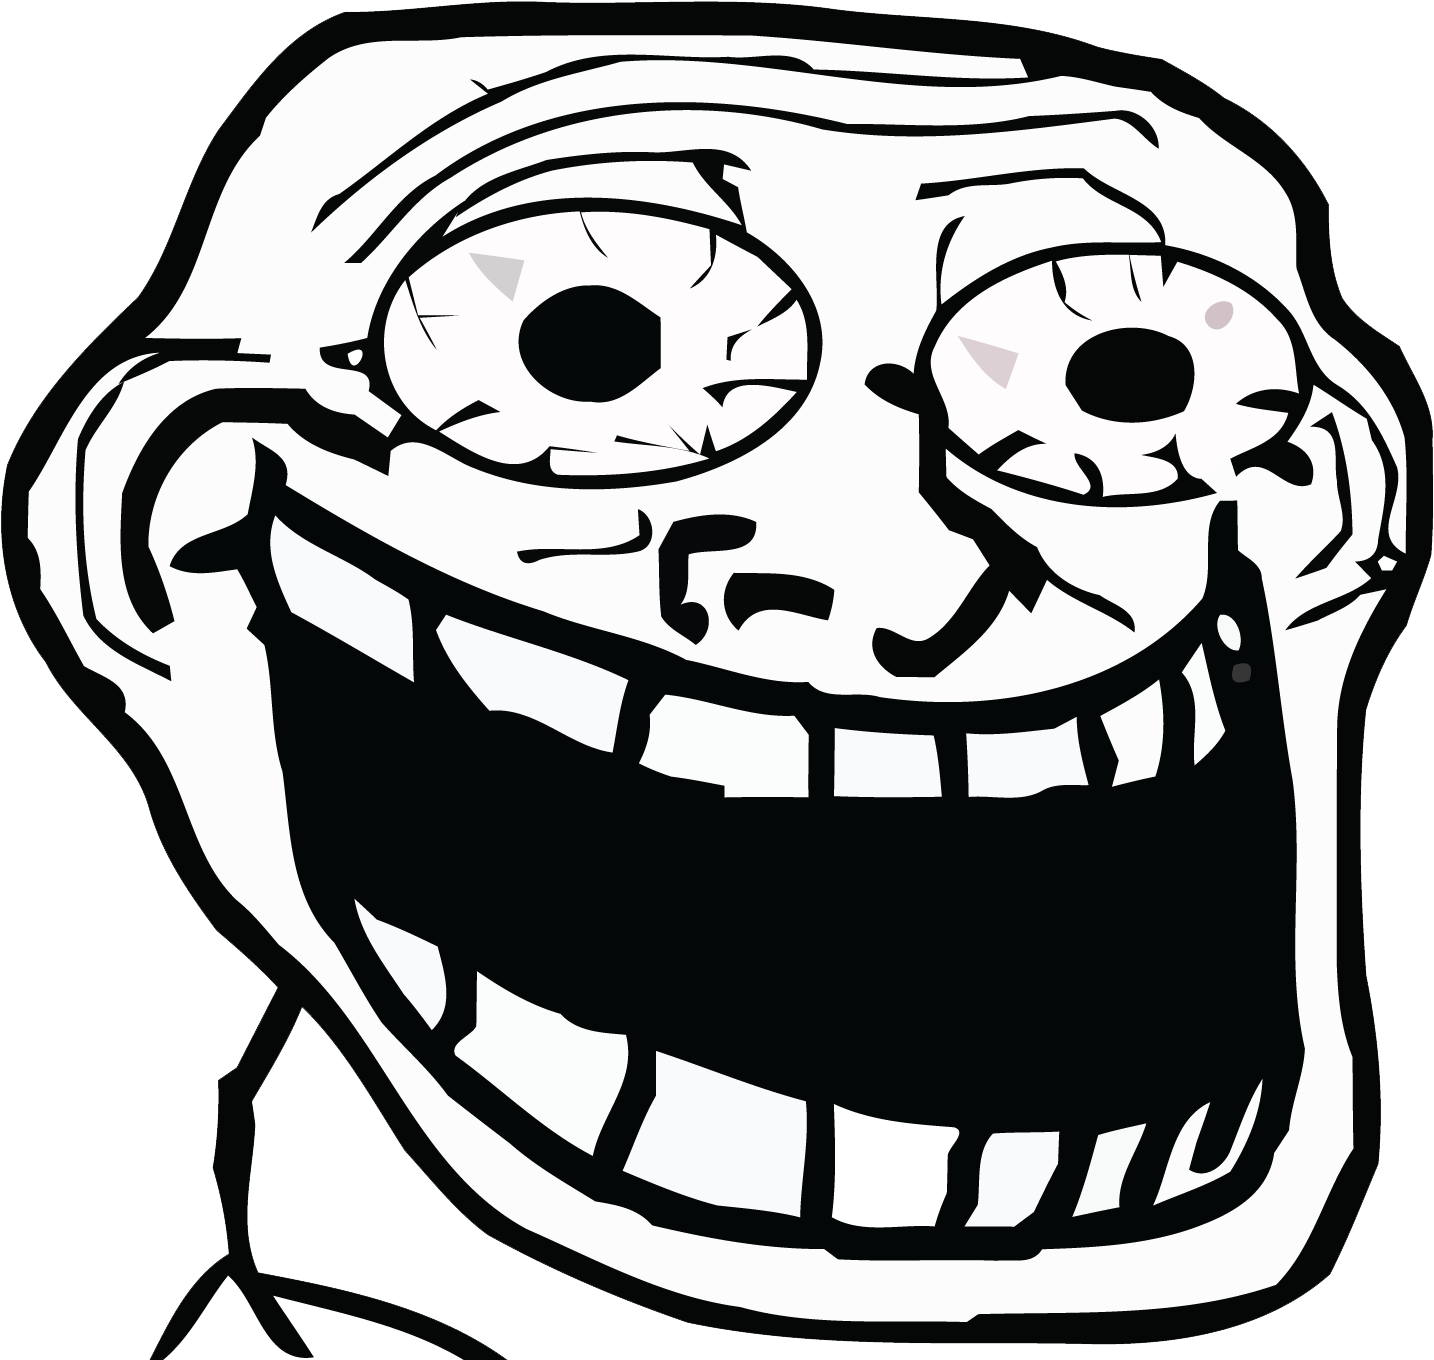 Screaming Troll Face with Glowing Eyes Blank Template - Imgflip